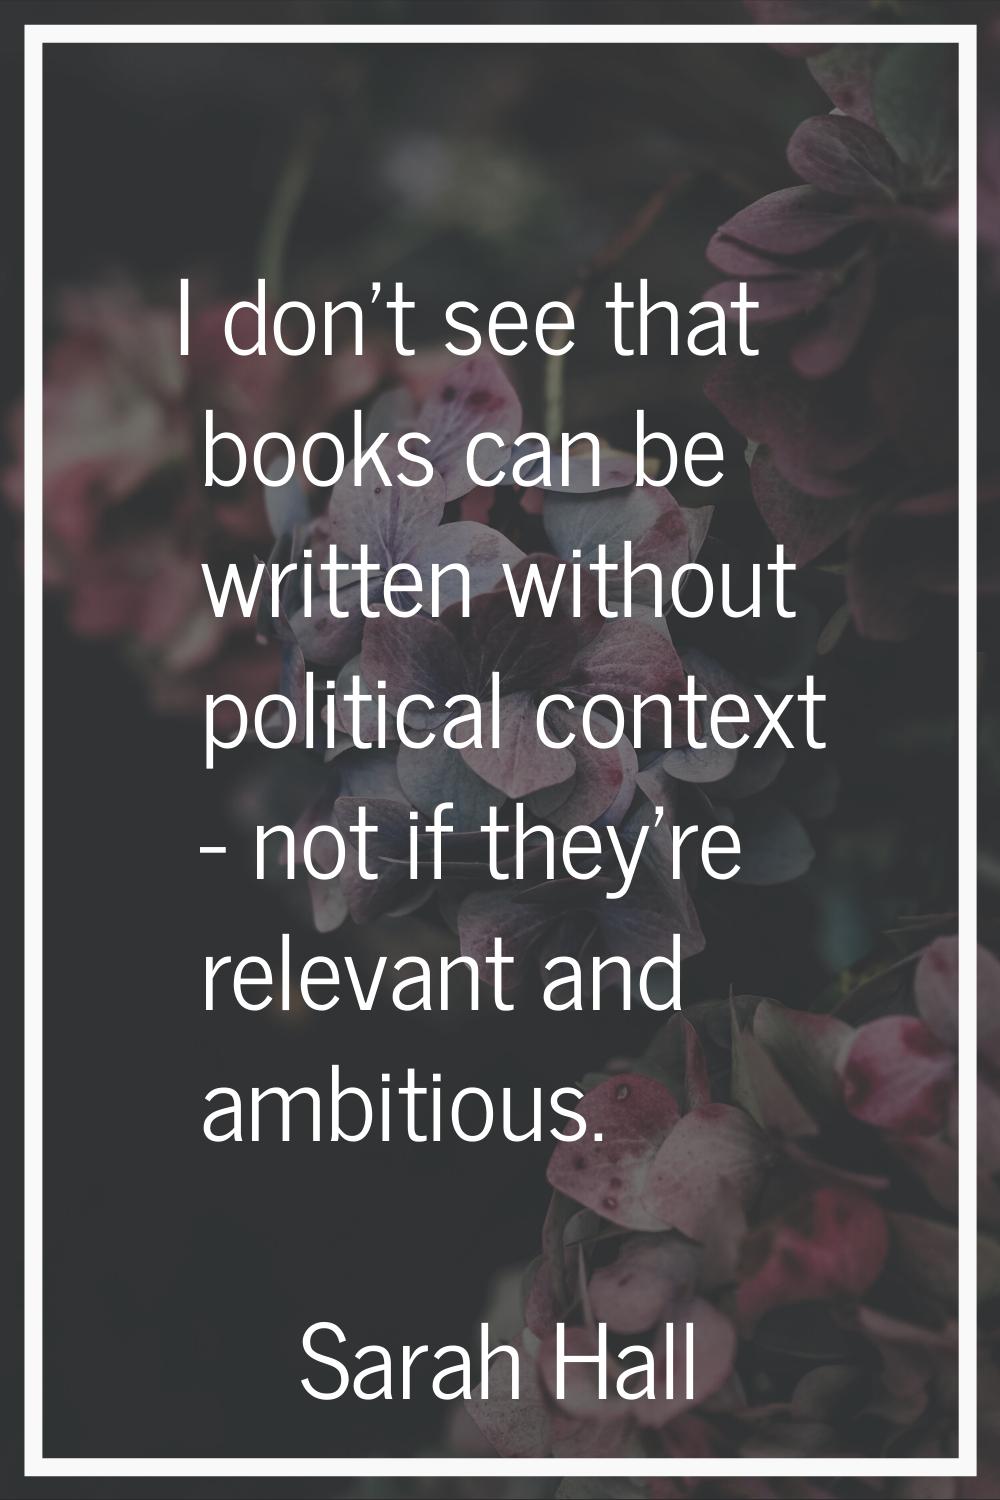 I don't see that books can be written without political context - not if they're relevant and ambit